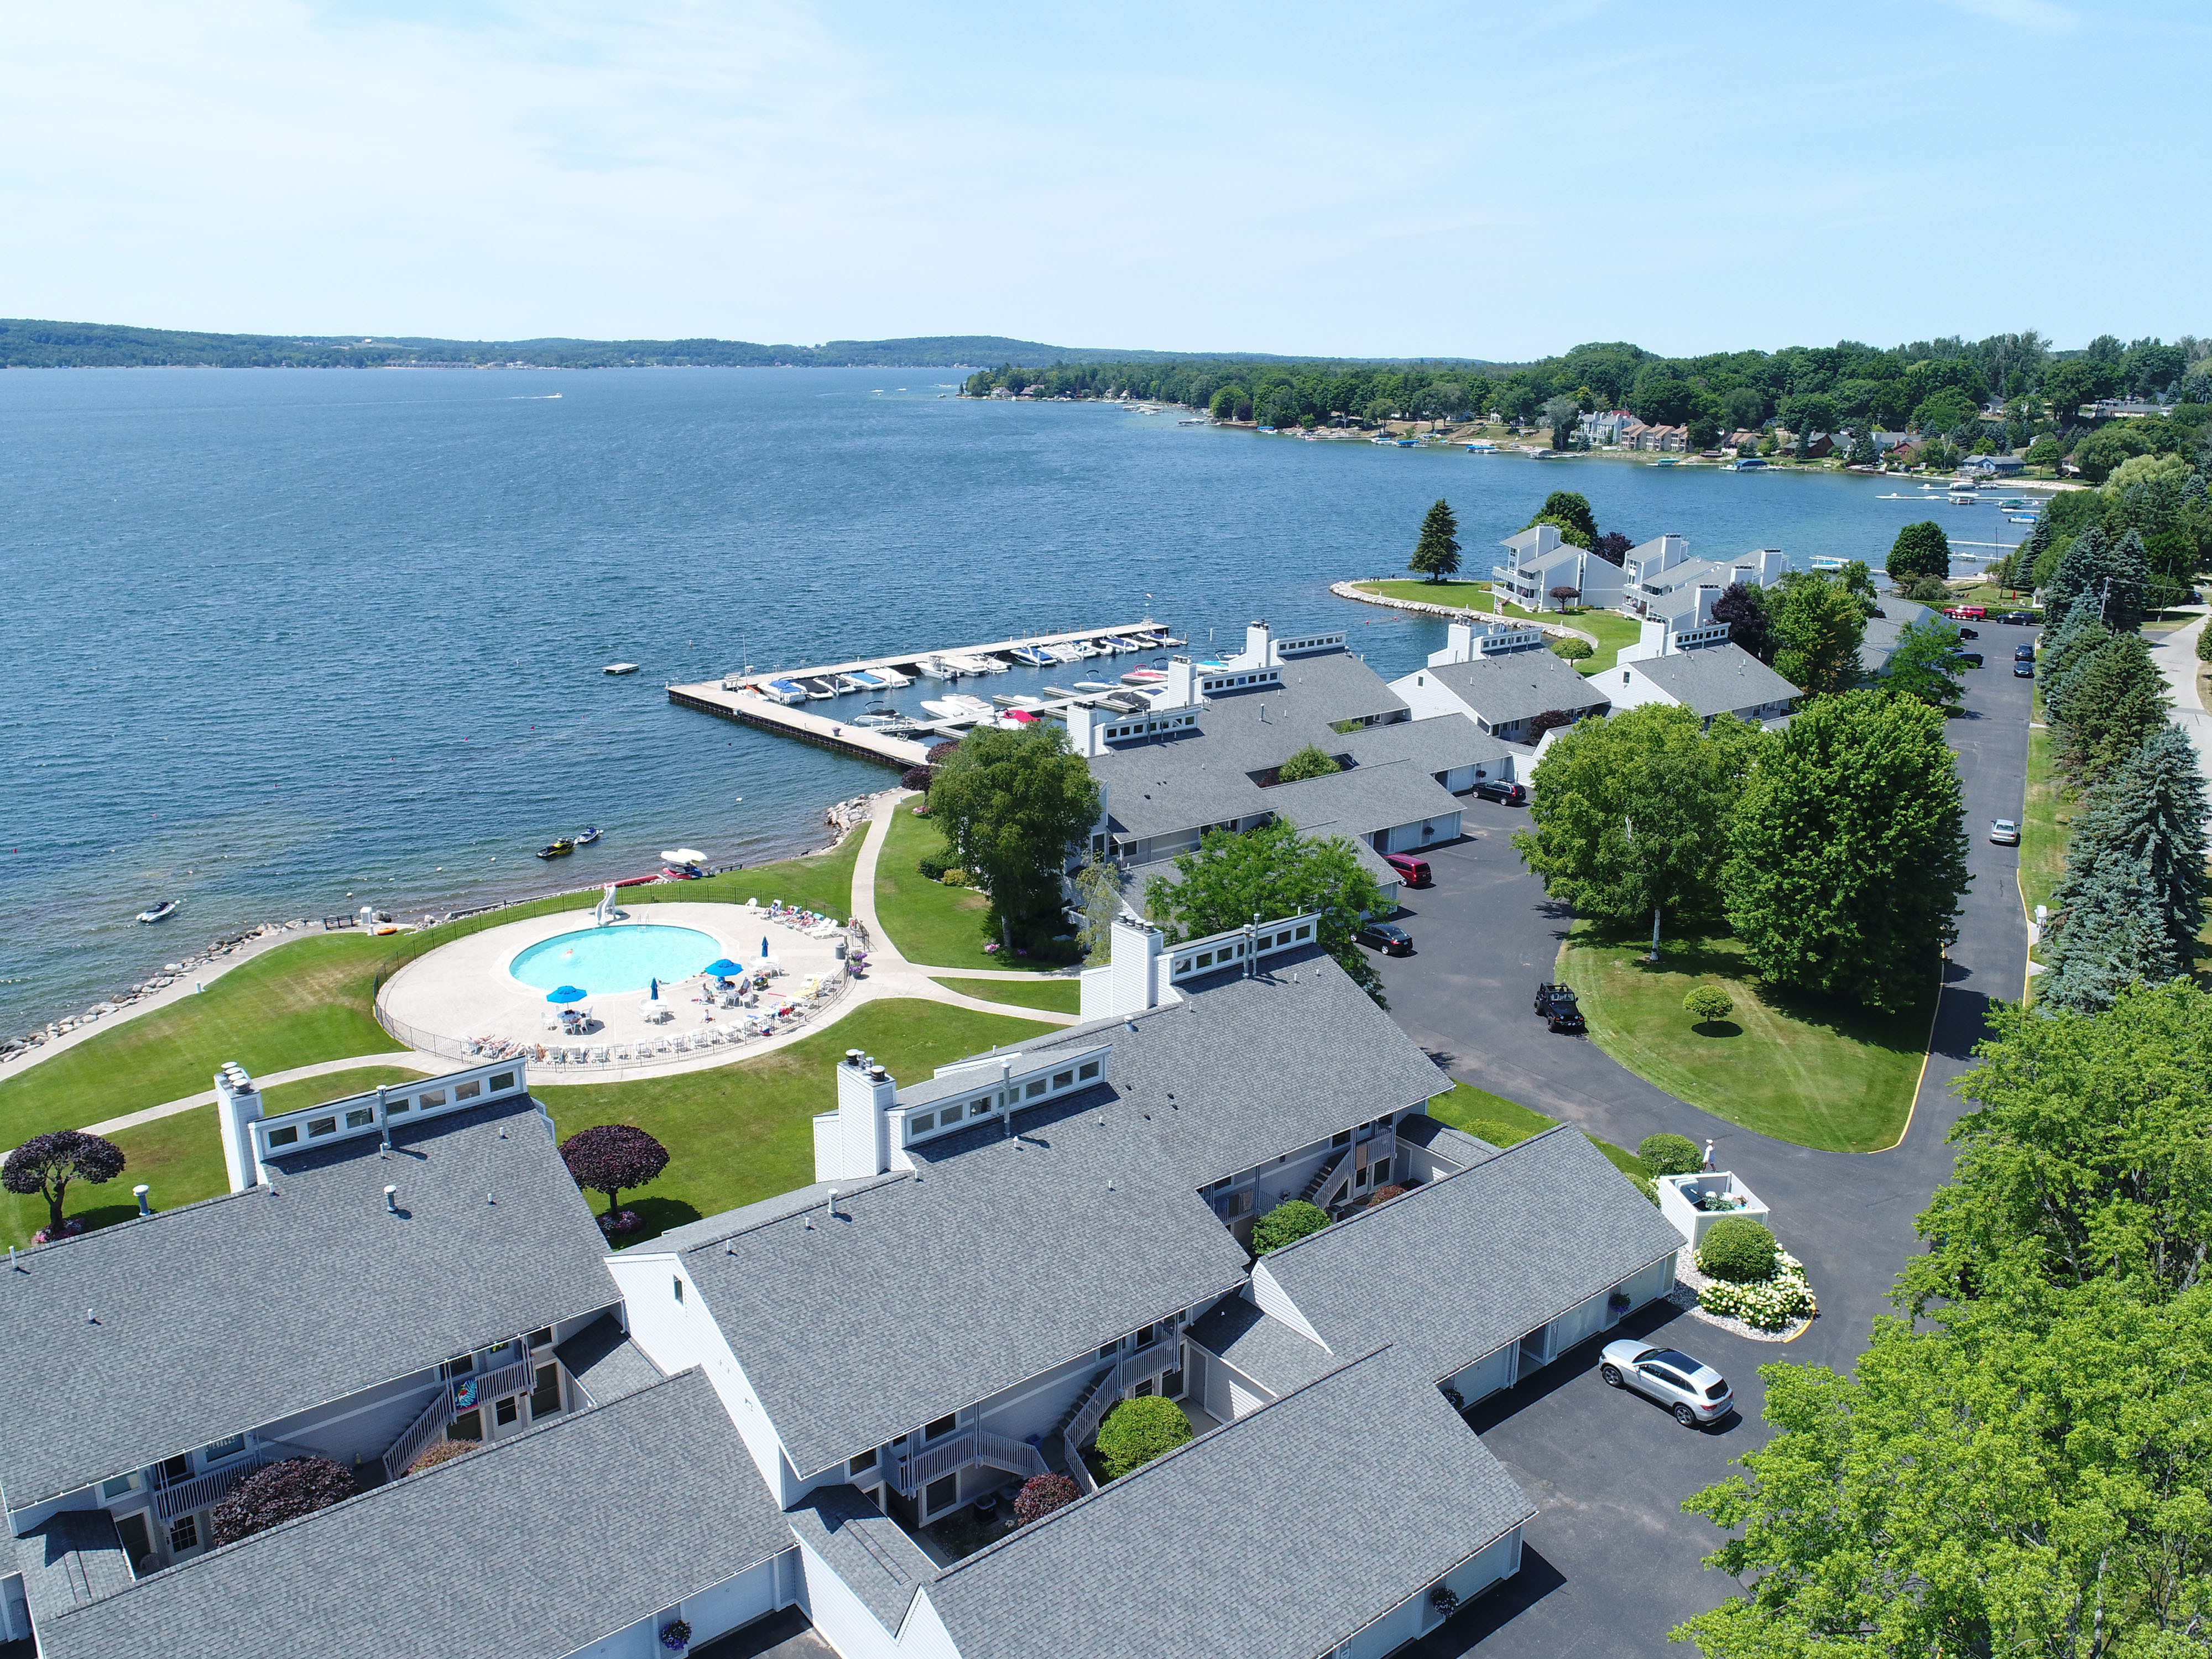 The Landings condominiums are located on the southeast shore of Lake Charlevoix in Boyne City, Michigan.